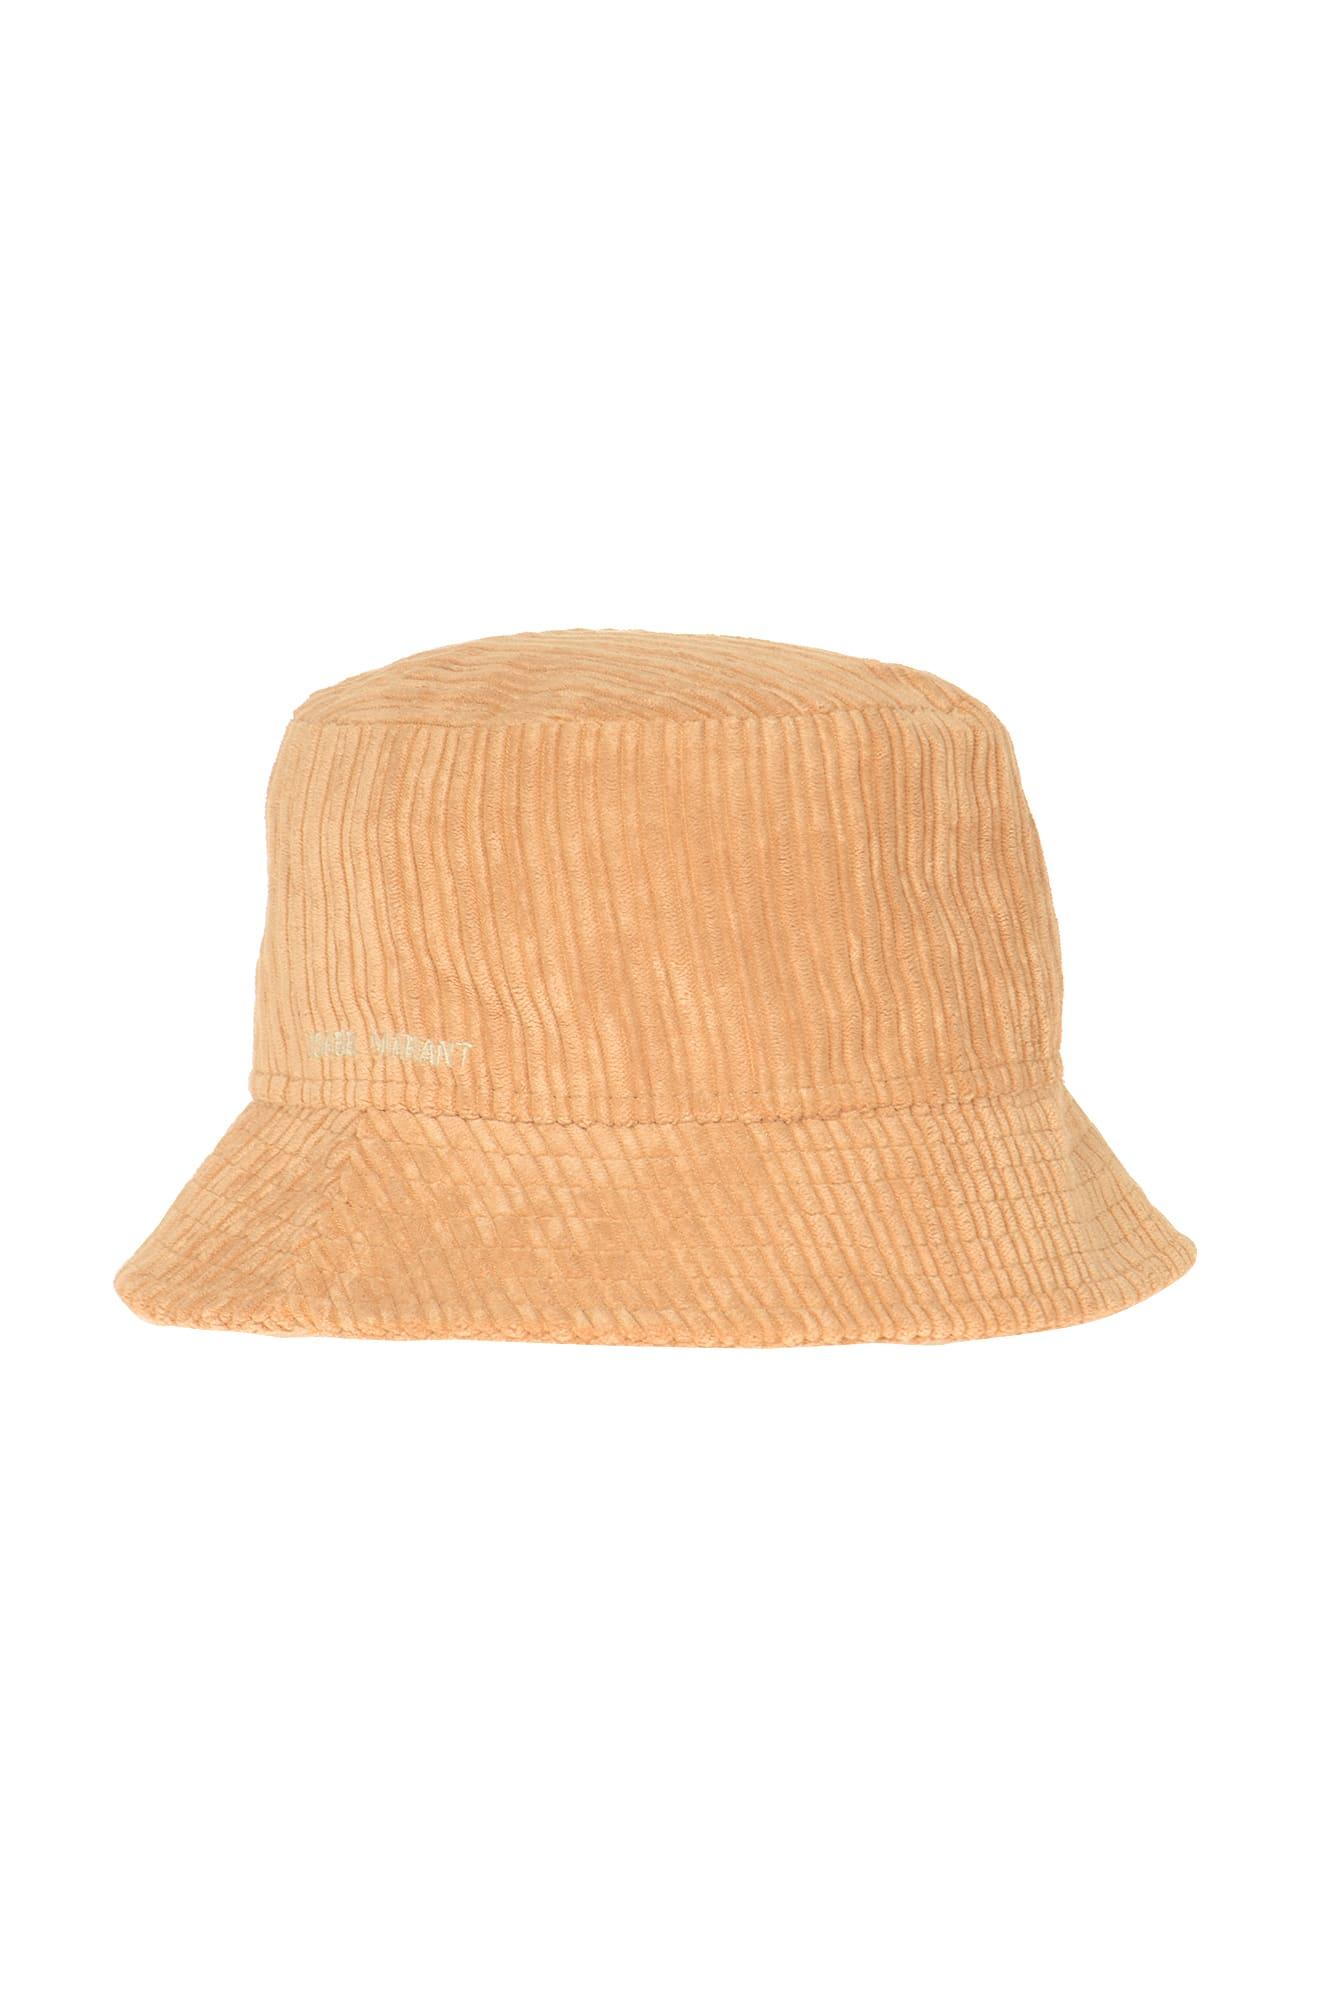 Womens Accessories Hats Isabel Marant Cotton Haley Bucket Hat in Chestnut Natural 